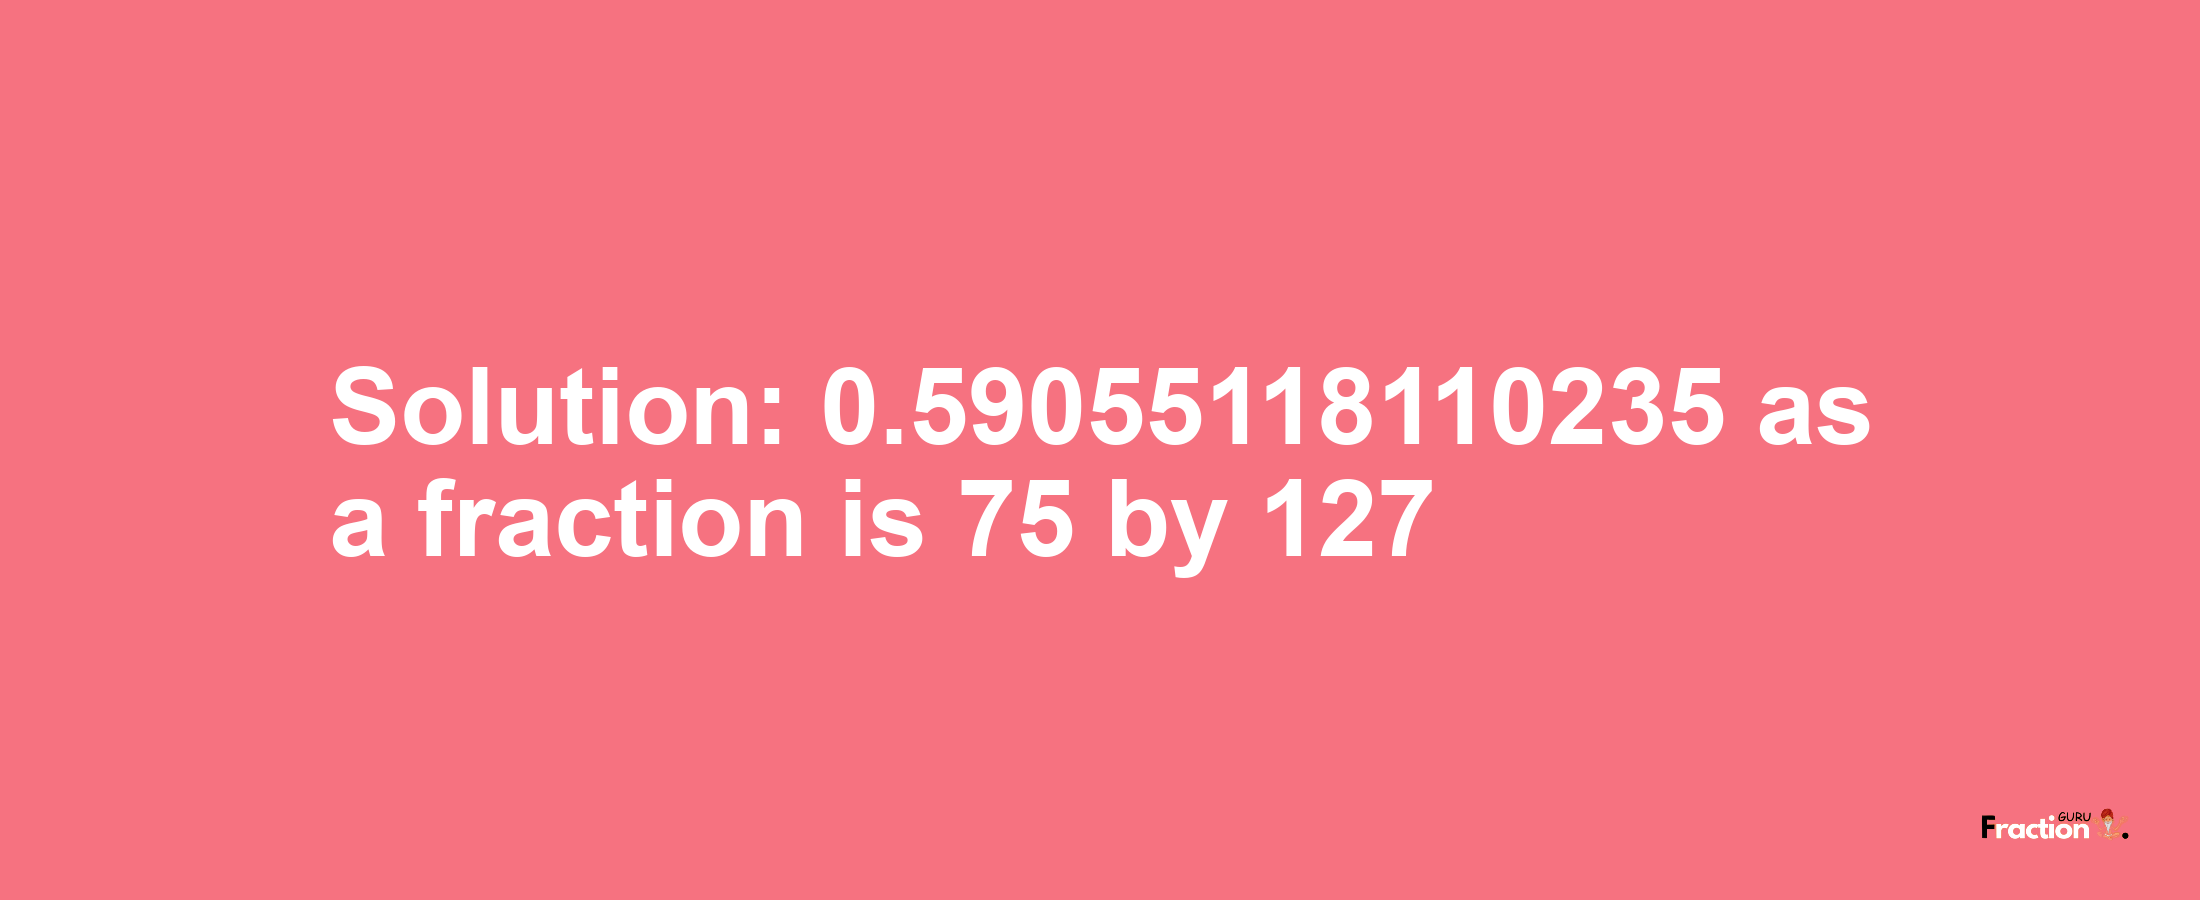 Solution:0.59055118110235 as a fraction is 75/127